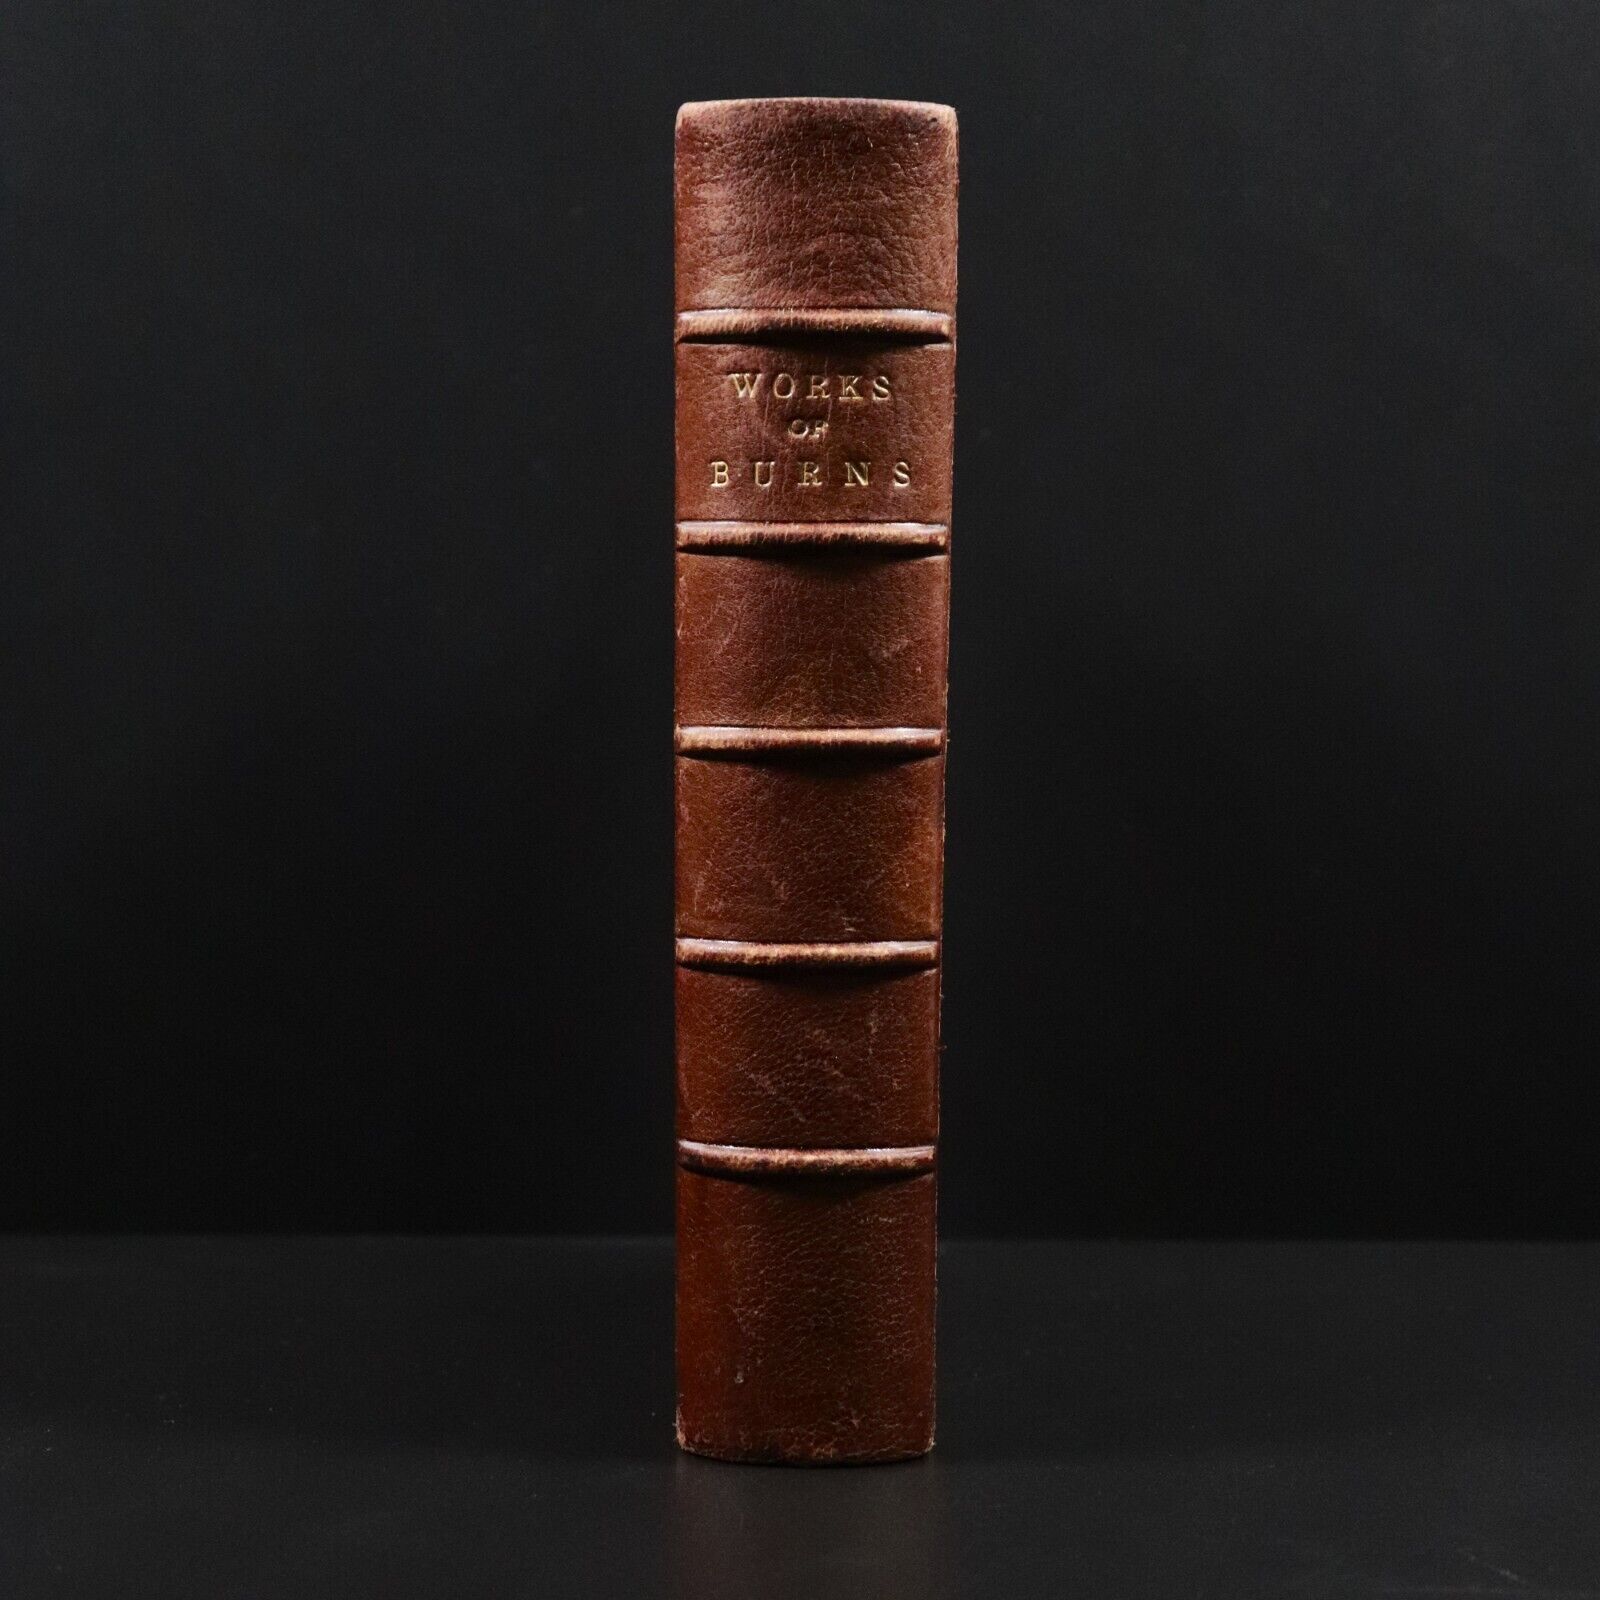 c1895 The Poetical Works Of Robert Burns Antique Poetry Book by Charles Kent - 0